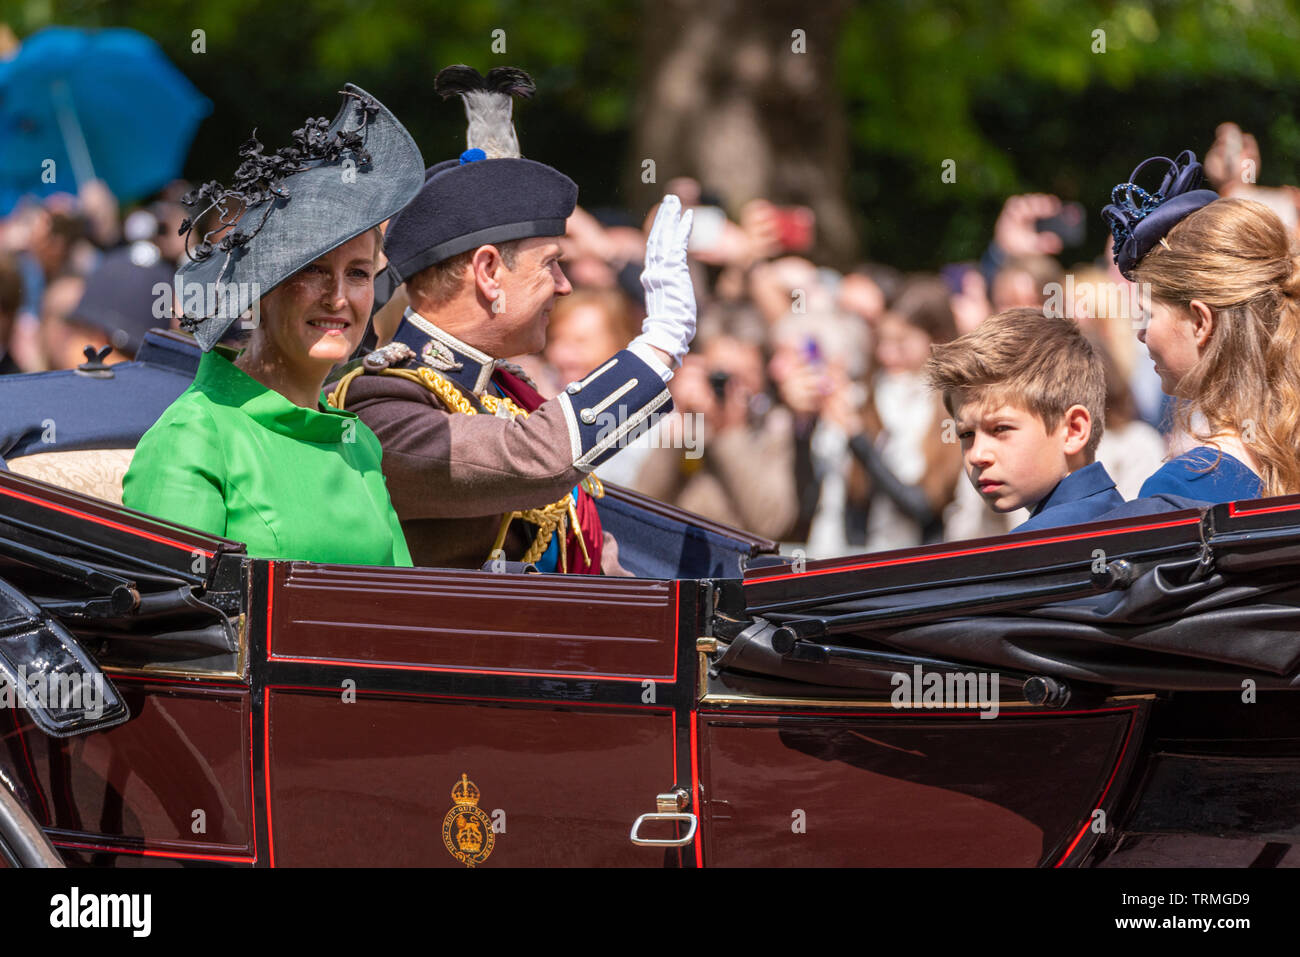 Sophie, Countess of Wessex with Prince Edward, James, Viscount Severn and Lady Louise Windsor at Trooping the Colour in carriage on The Mall, London Stock Photo